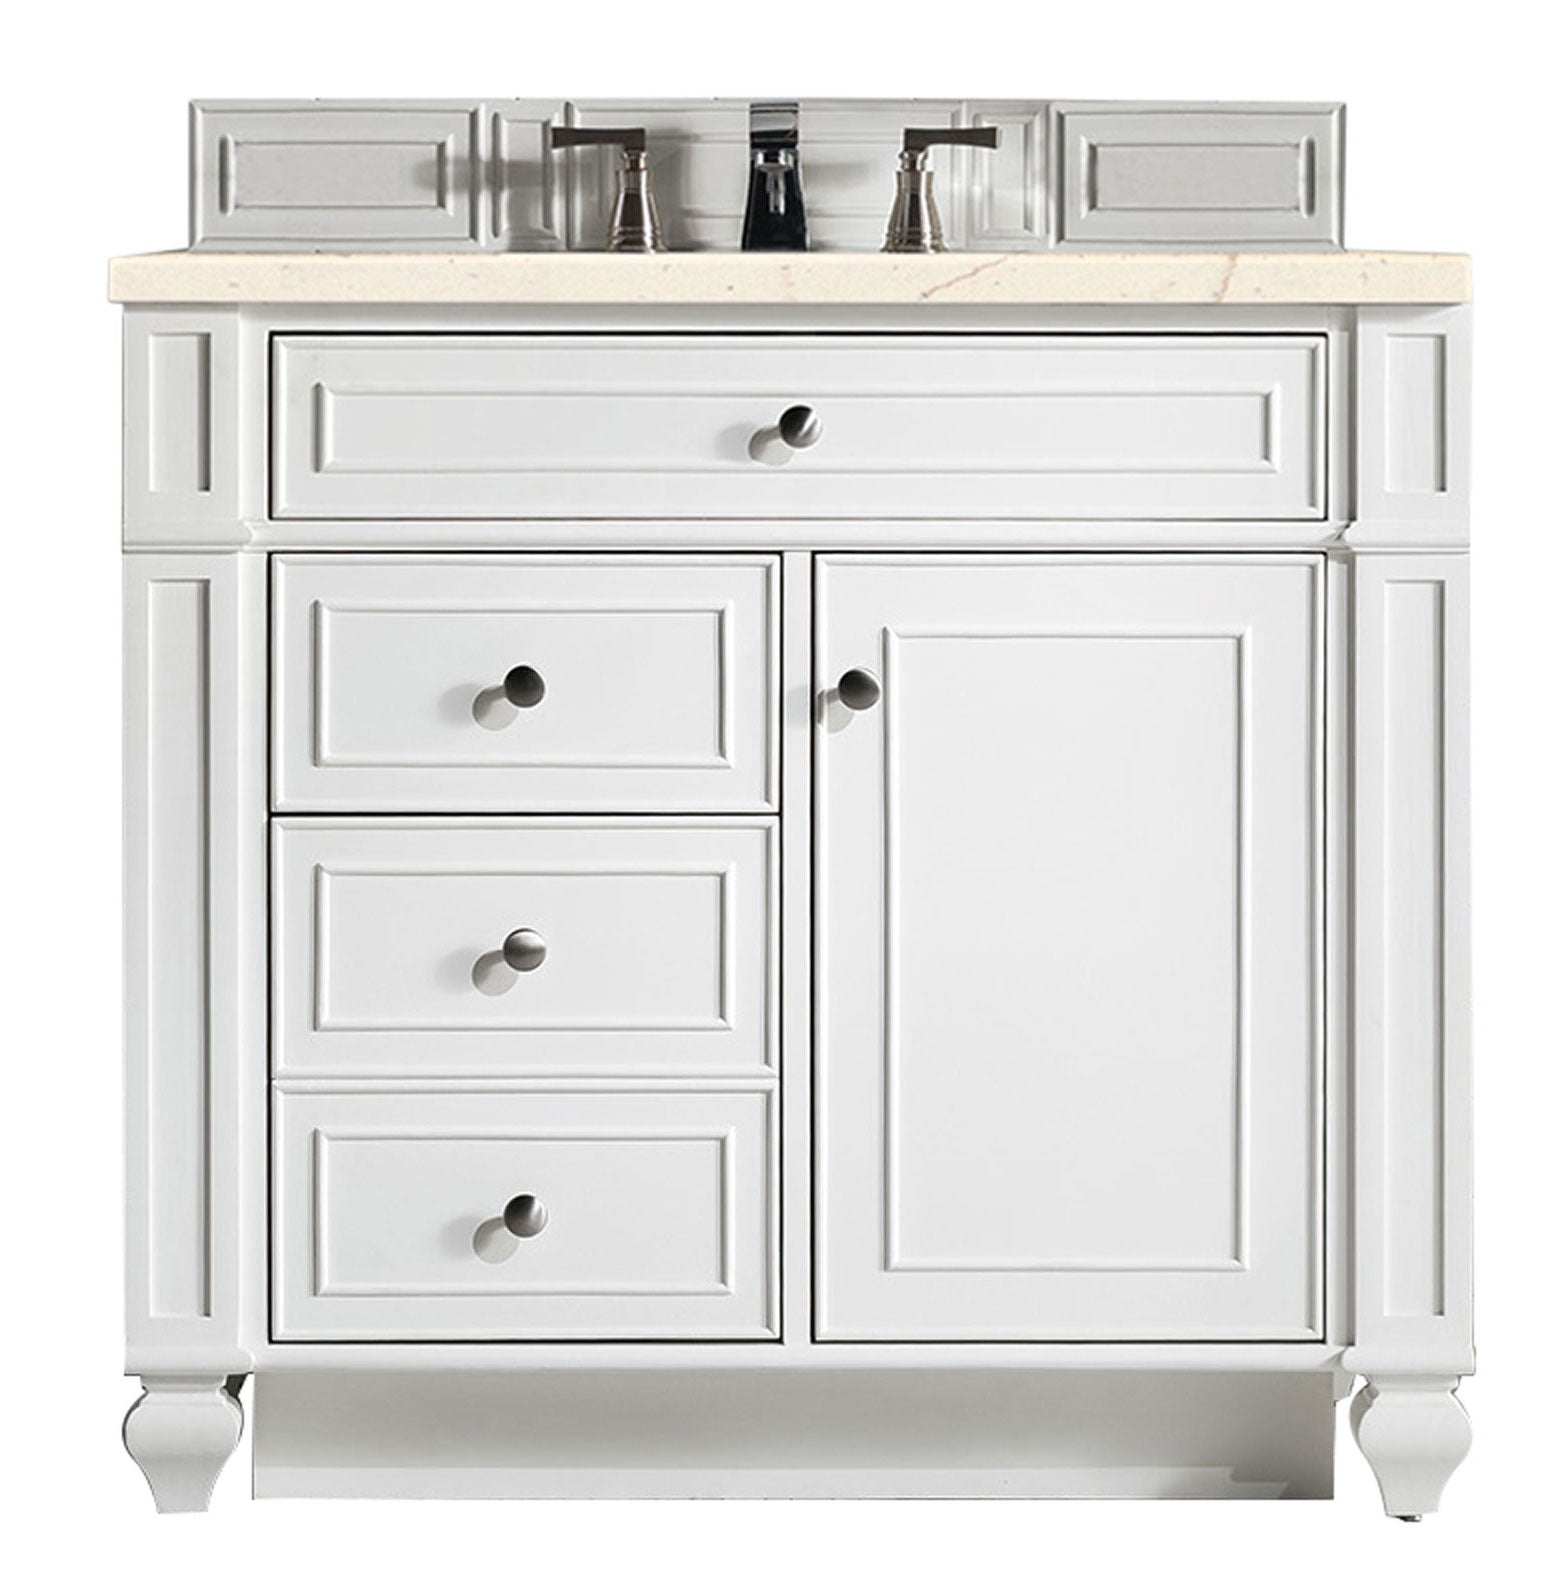 James Martin Vanities Bristol Collection 36 in. Single Vanity in Bright White with Countertop Options Eternal Marfil Quartz